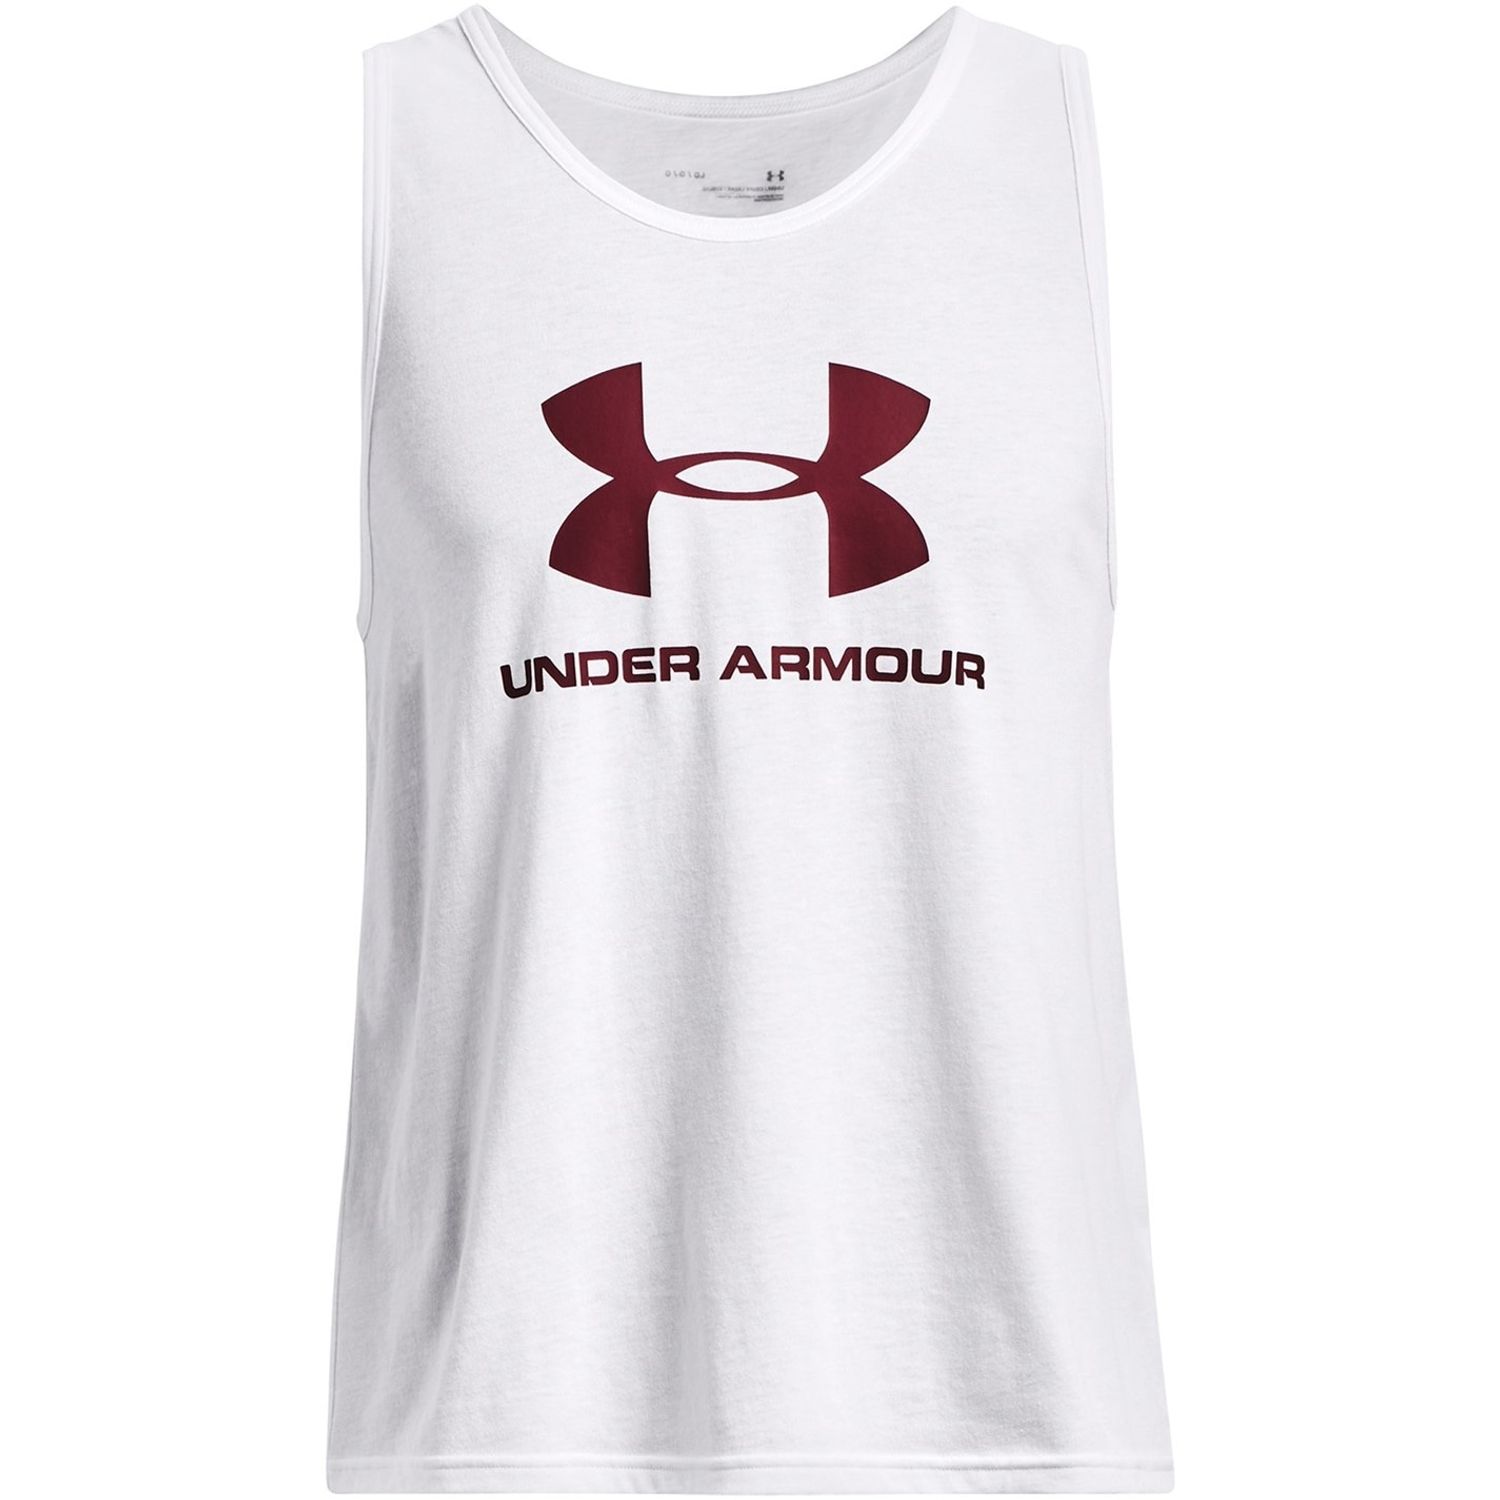 Athletic Tank Top By Under Armour Size: Xl